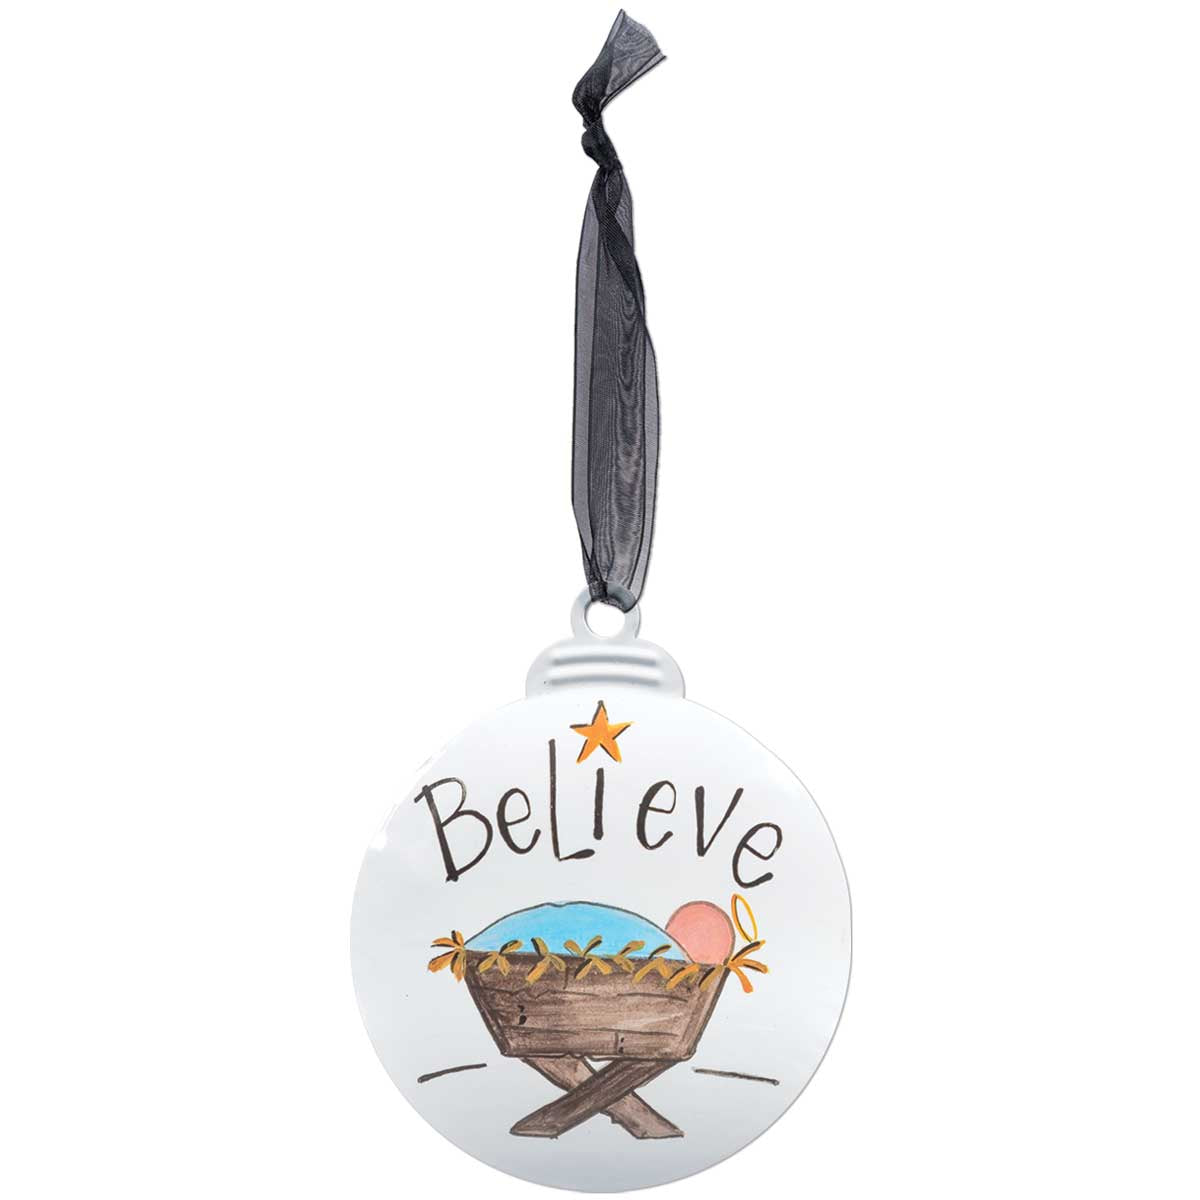 Believe with Baby Jesus Manger Scene Christmas Ornament